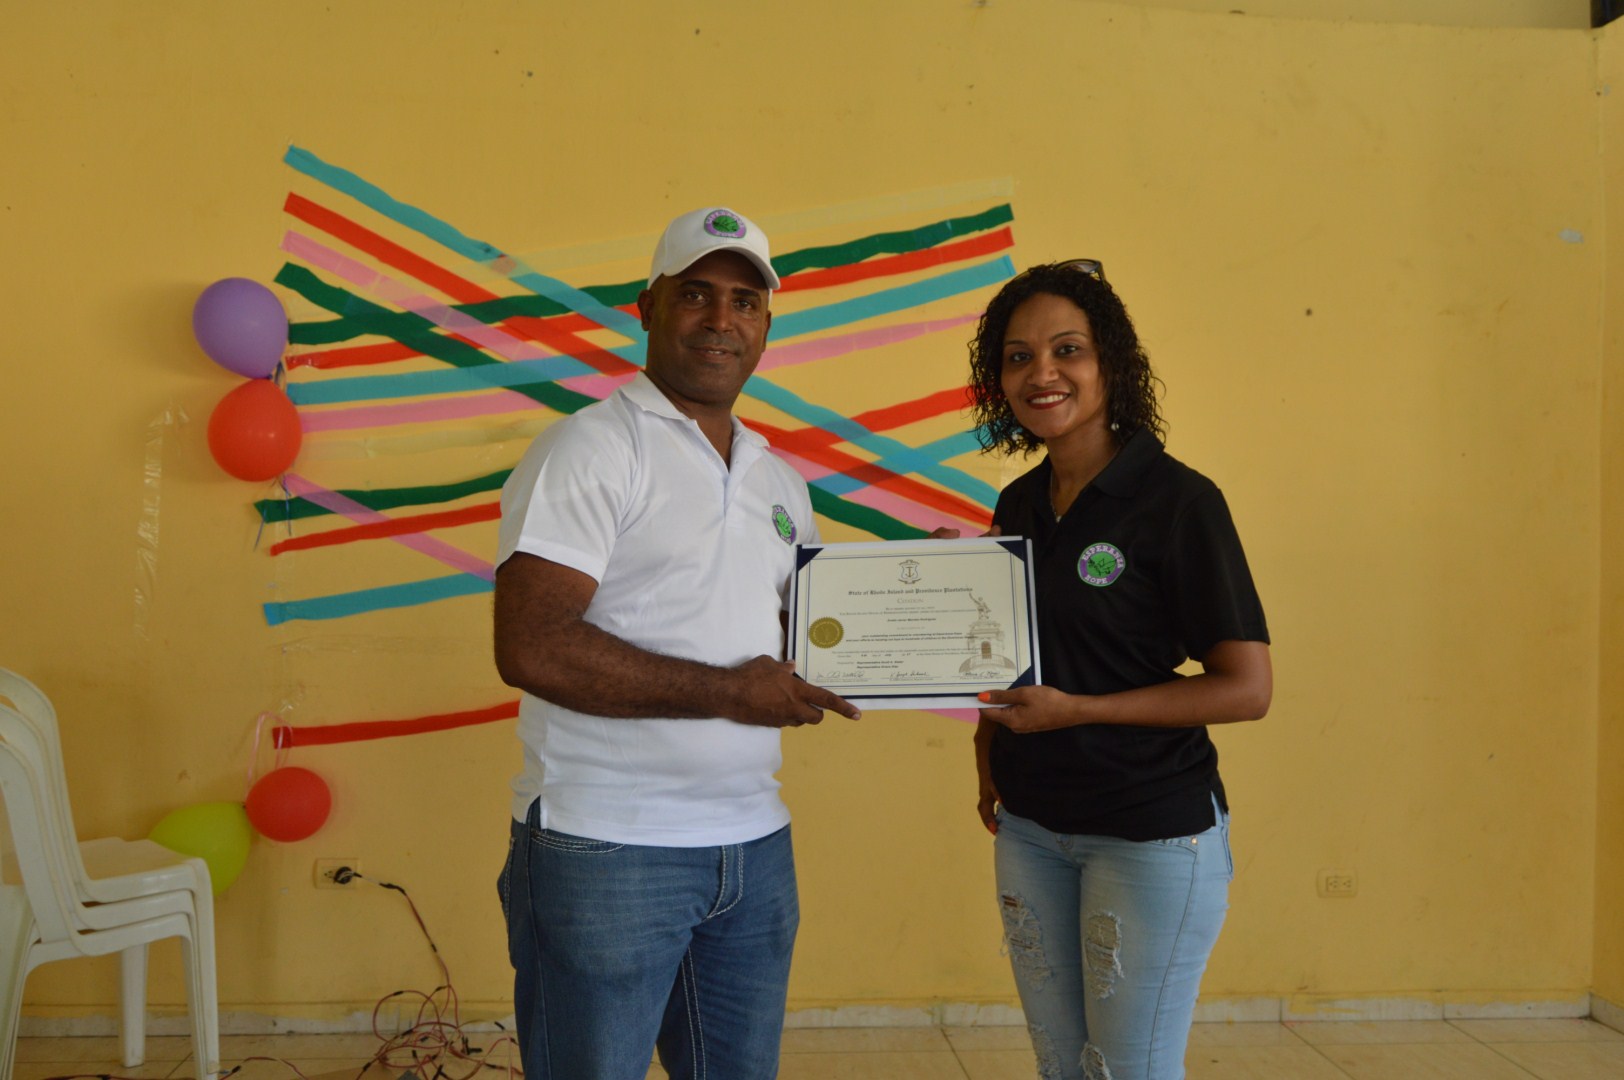 A man and a woman holding a certificate